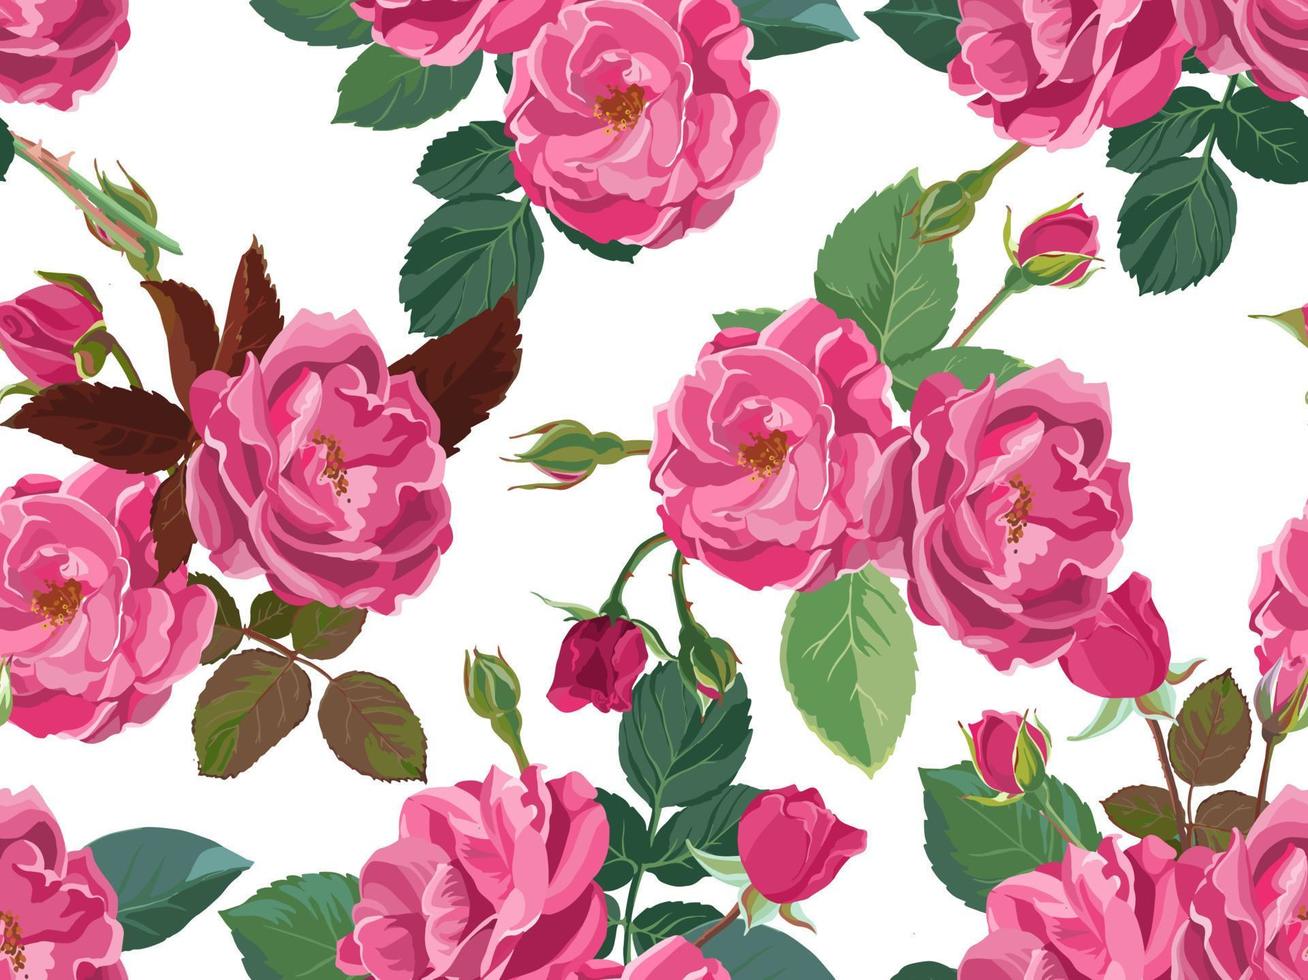 Pink roses or peonies with leaves and branches vector